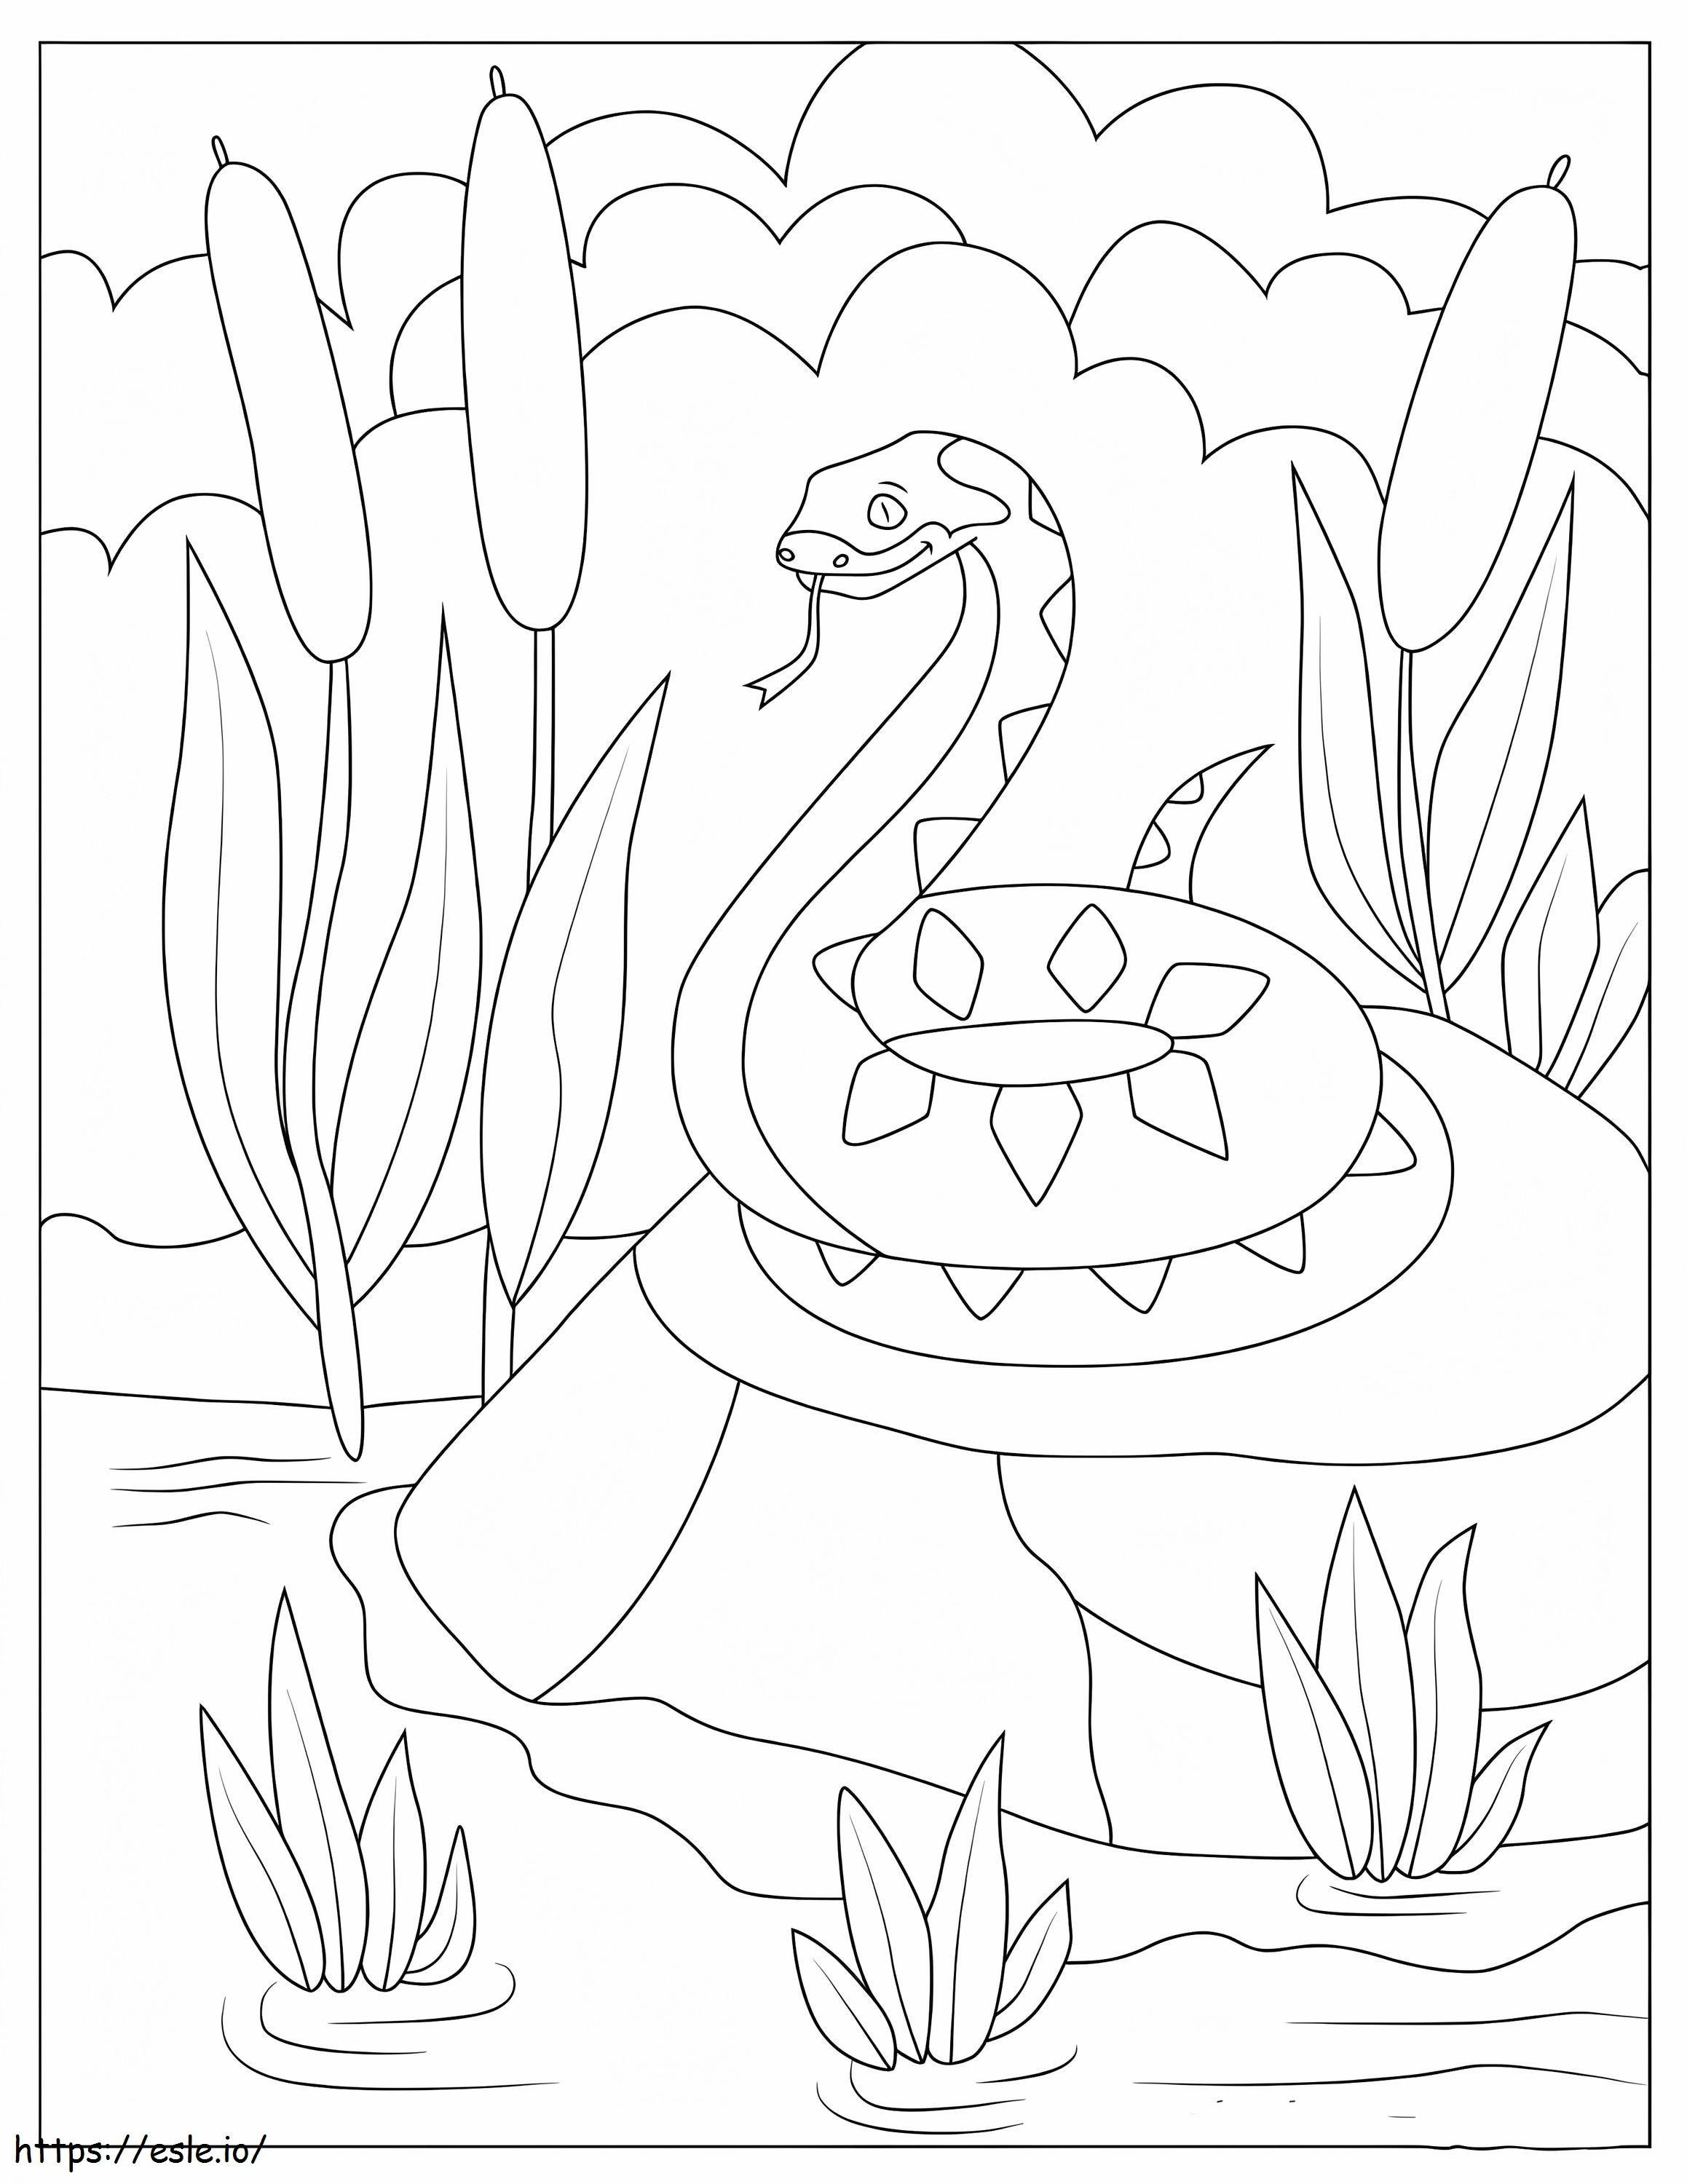 Free Snake coloring page